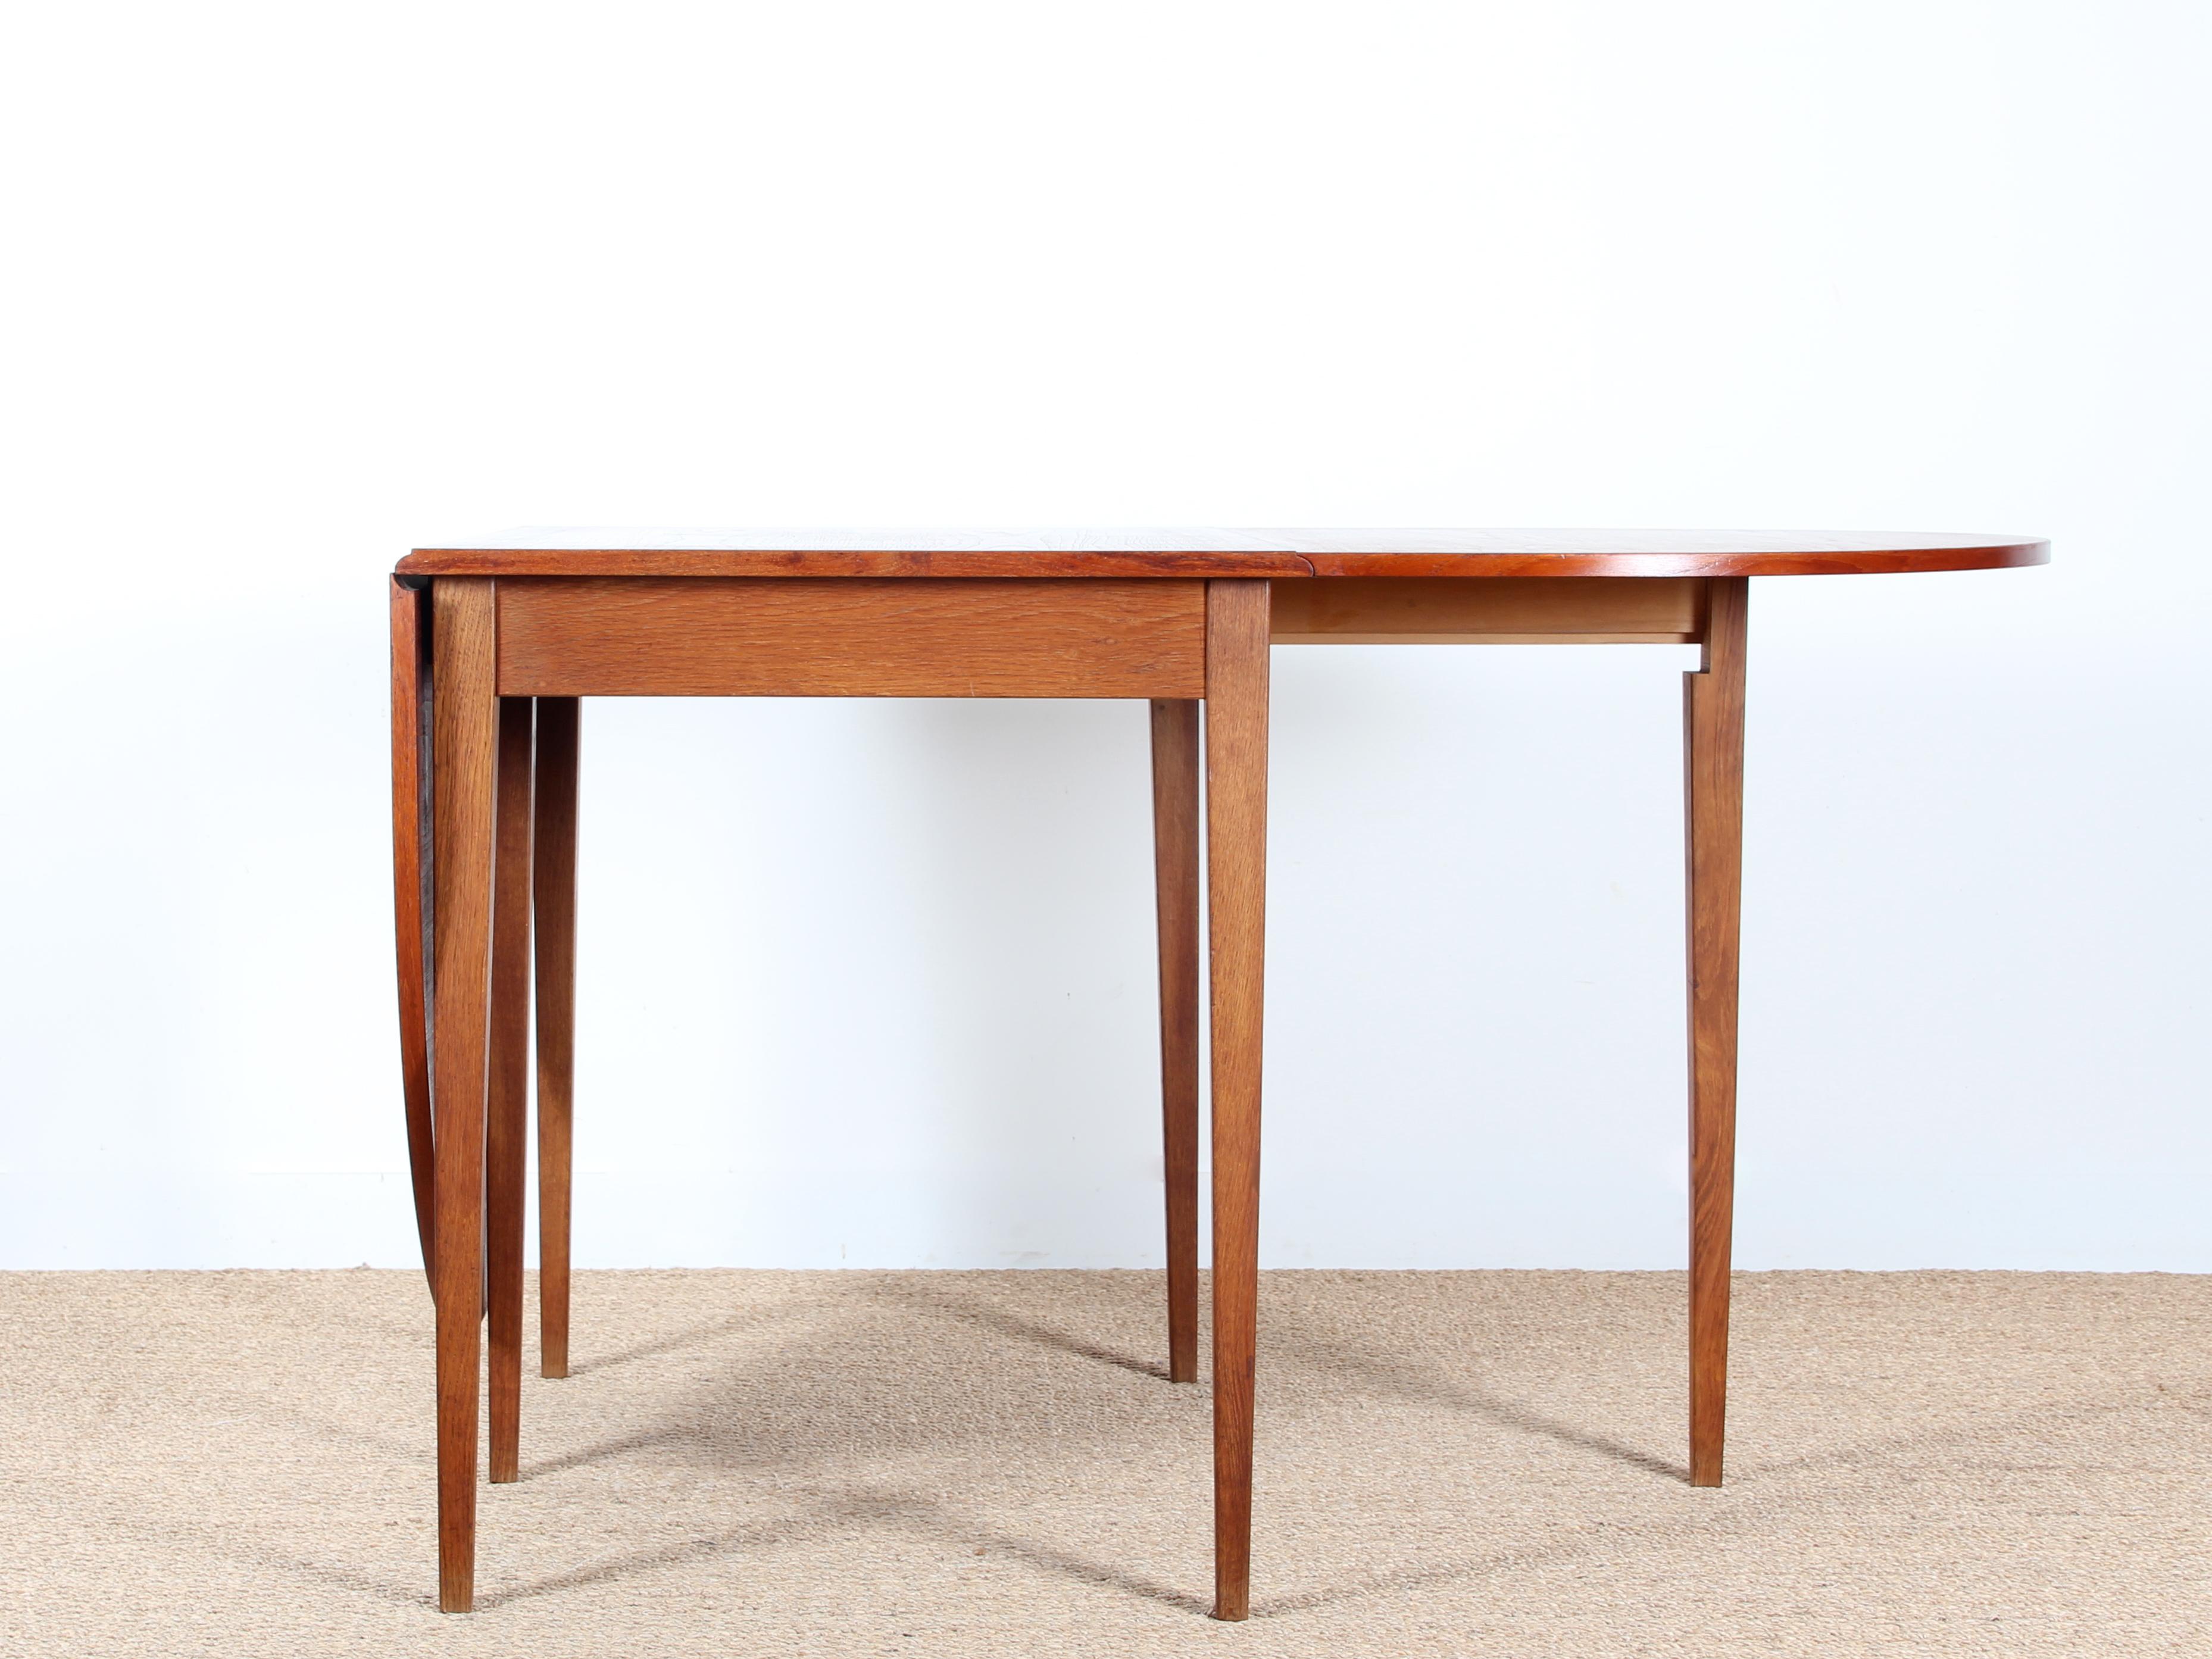 Mid-Century Modern Scandinavian dining table flap table in teak and oak for 2-6 seats. Perfect for small spaces.